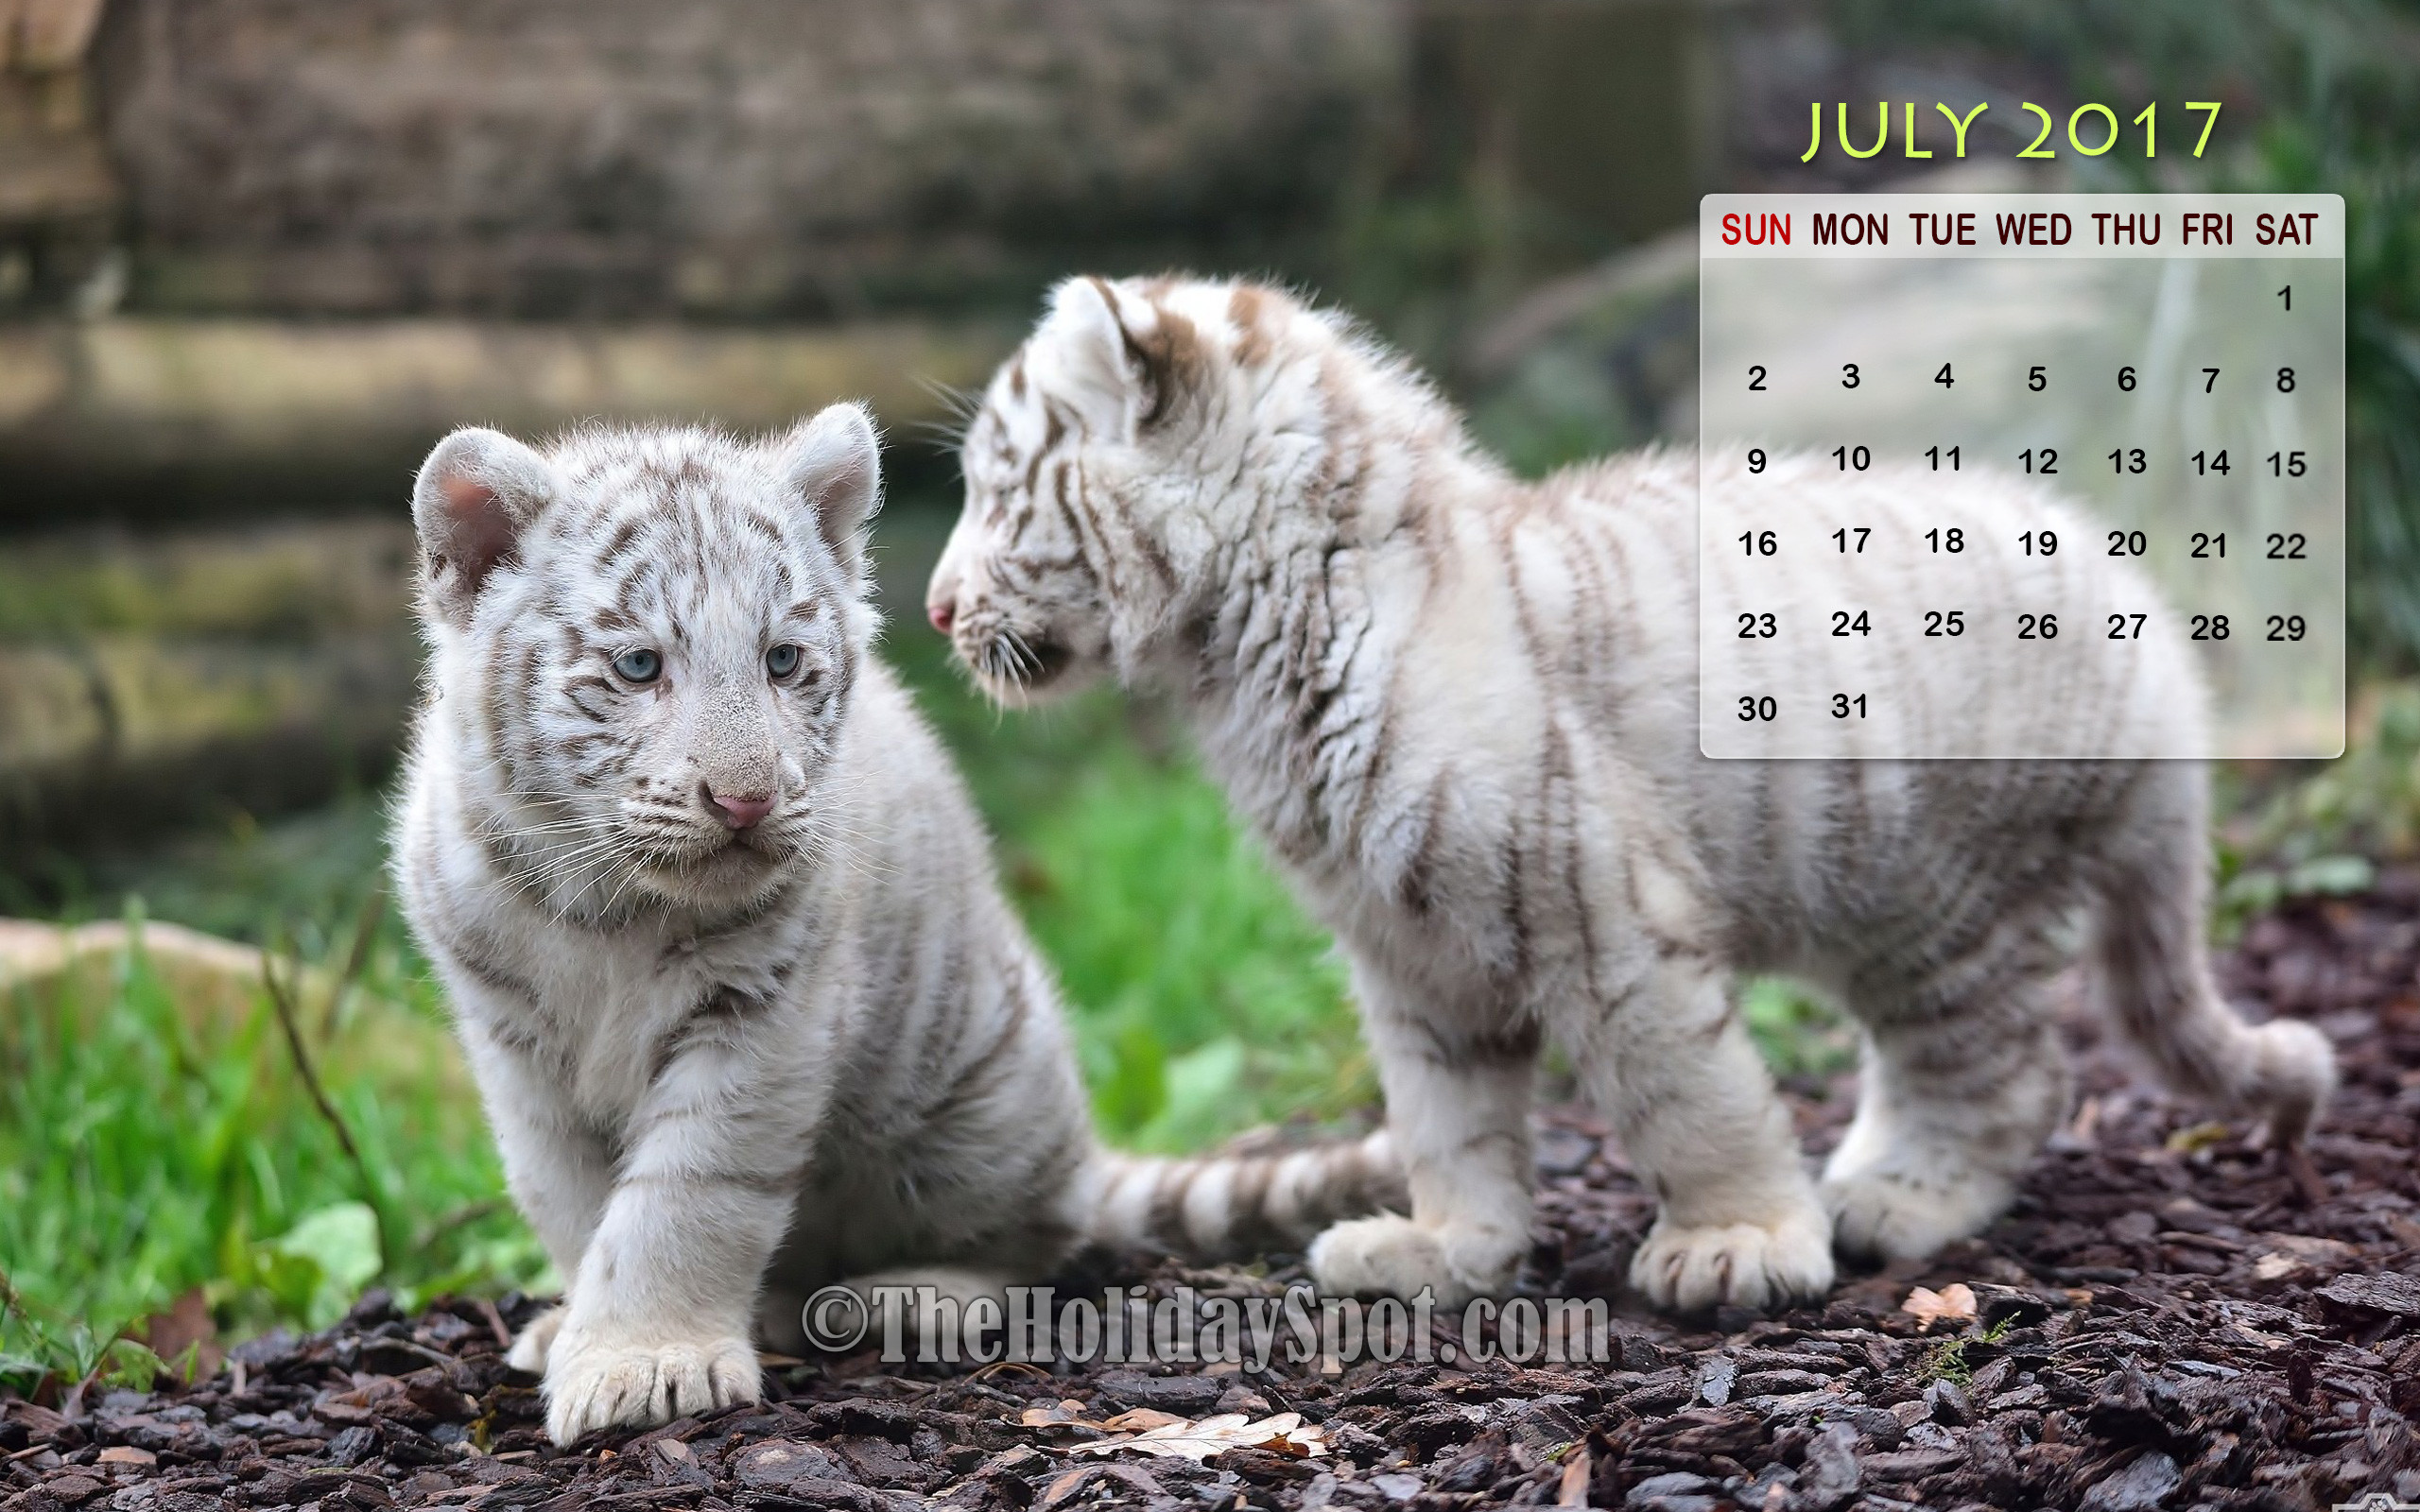 2560x1600 July 2017 Calendar Wallpaper of two little white tigers